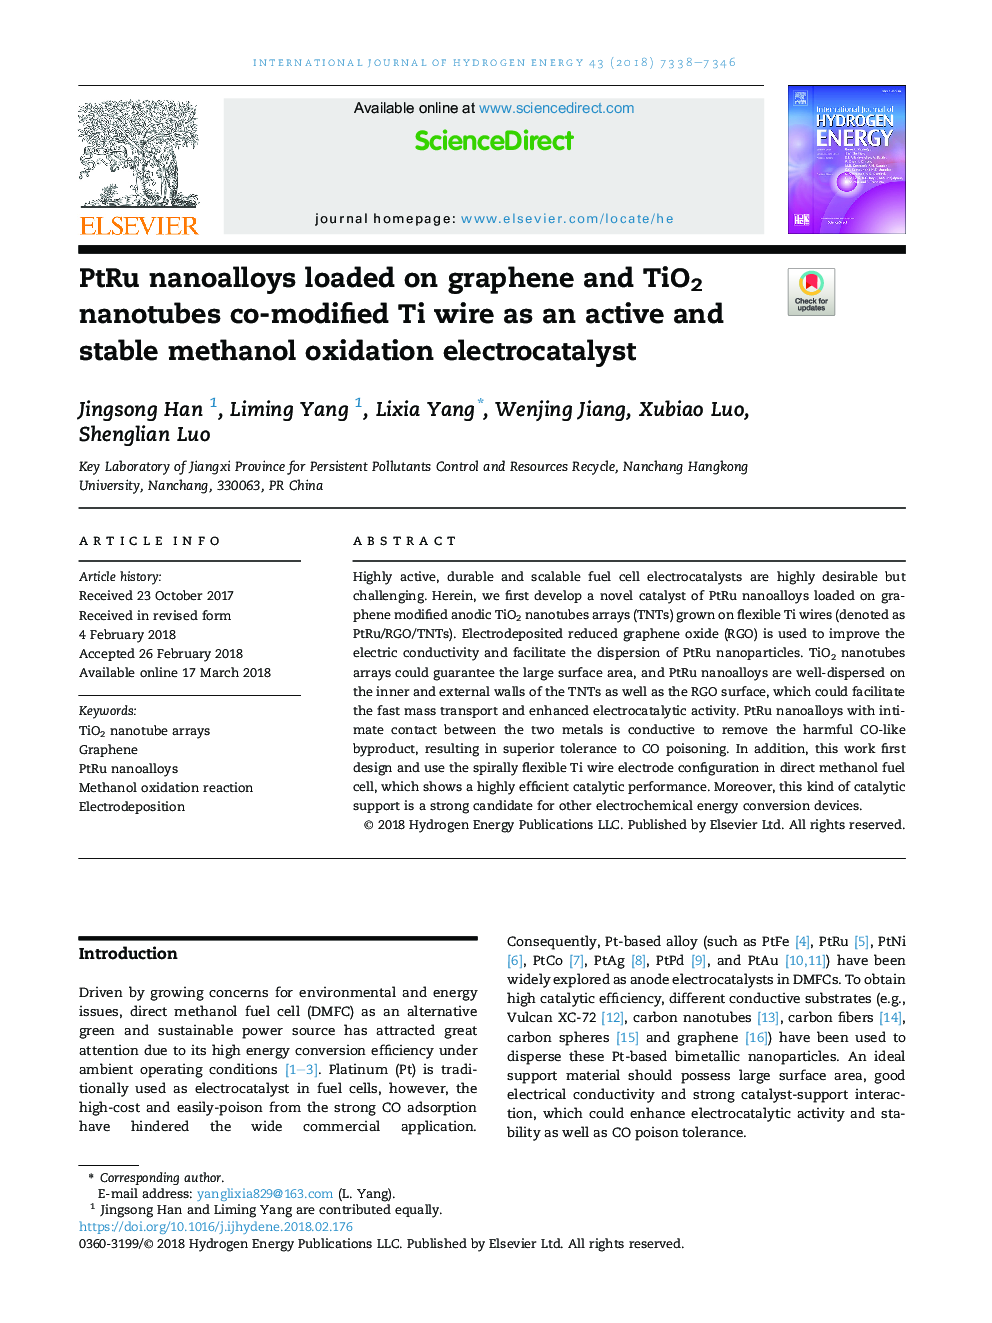 PtRu nanoalloys loaded on graphene and TiO2 nanotubes co-modified Ti wire as an active and stable methanol oxidation electrocatalyst